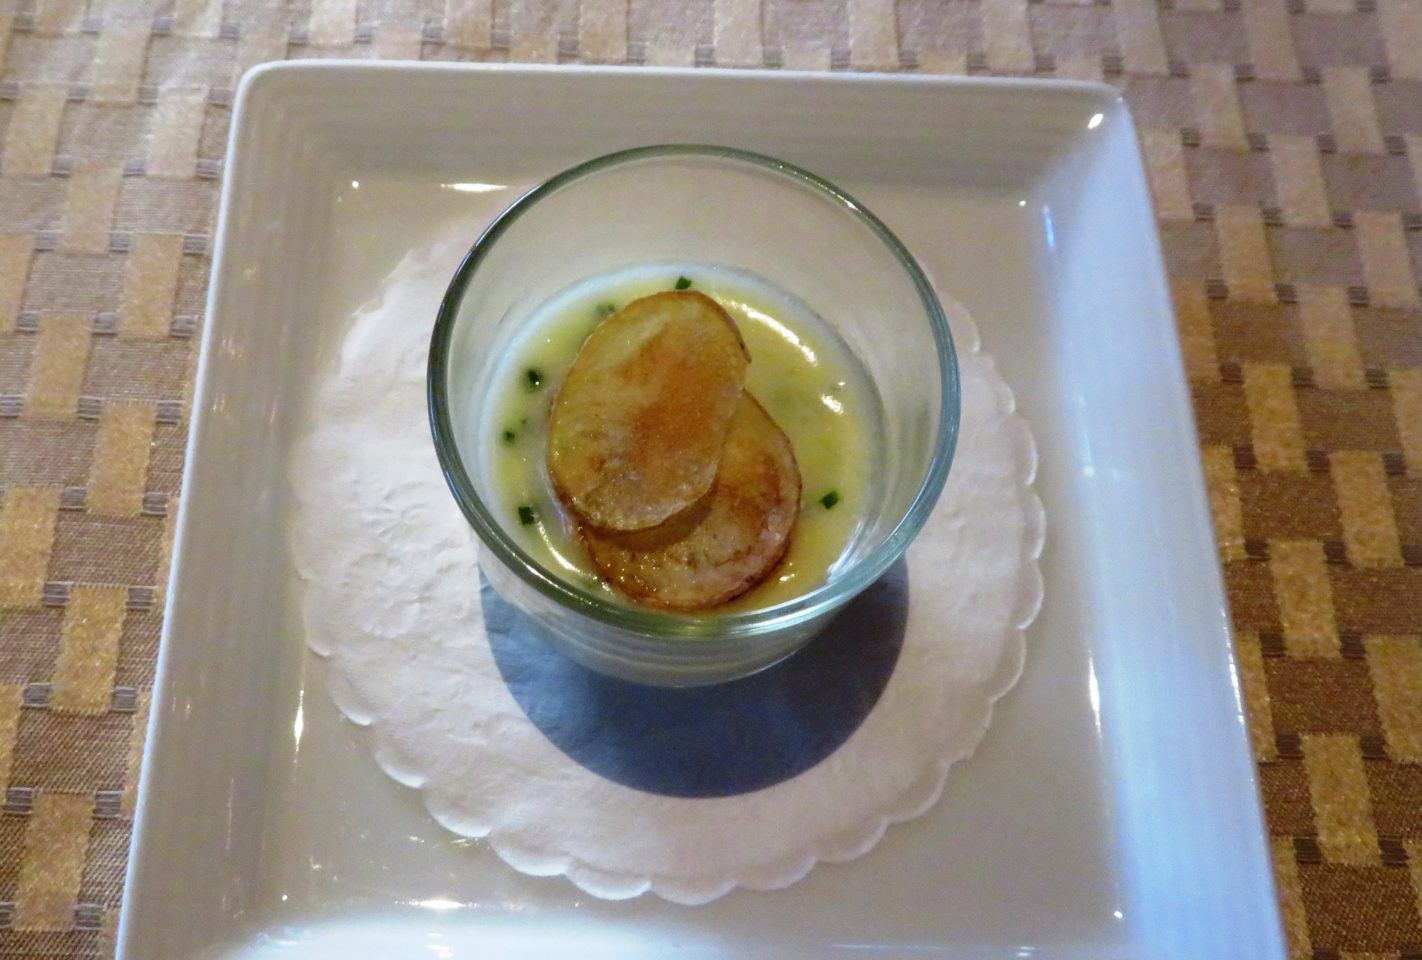 potato custard with chives to embolden the dish and home-made potato chips